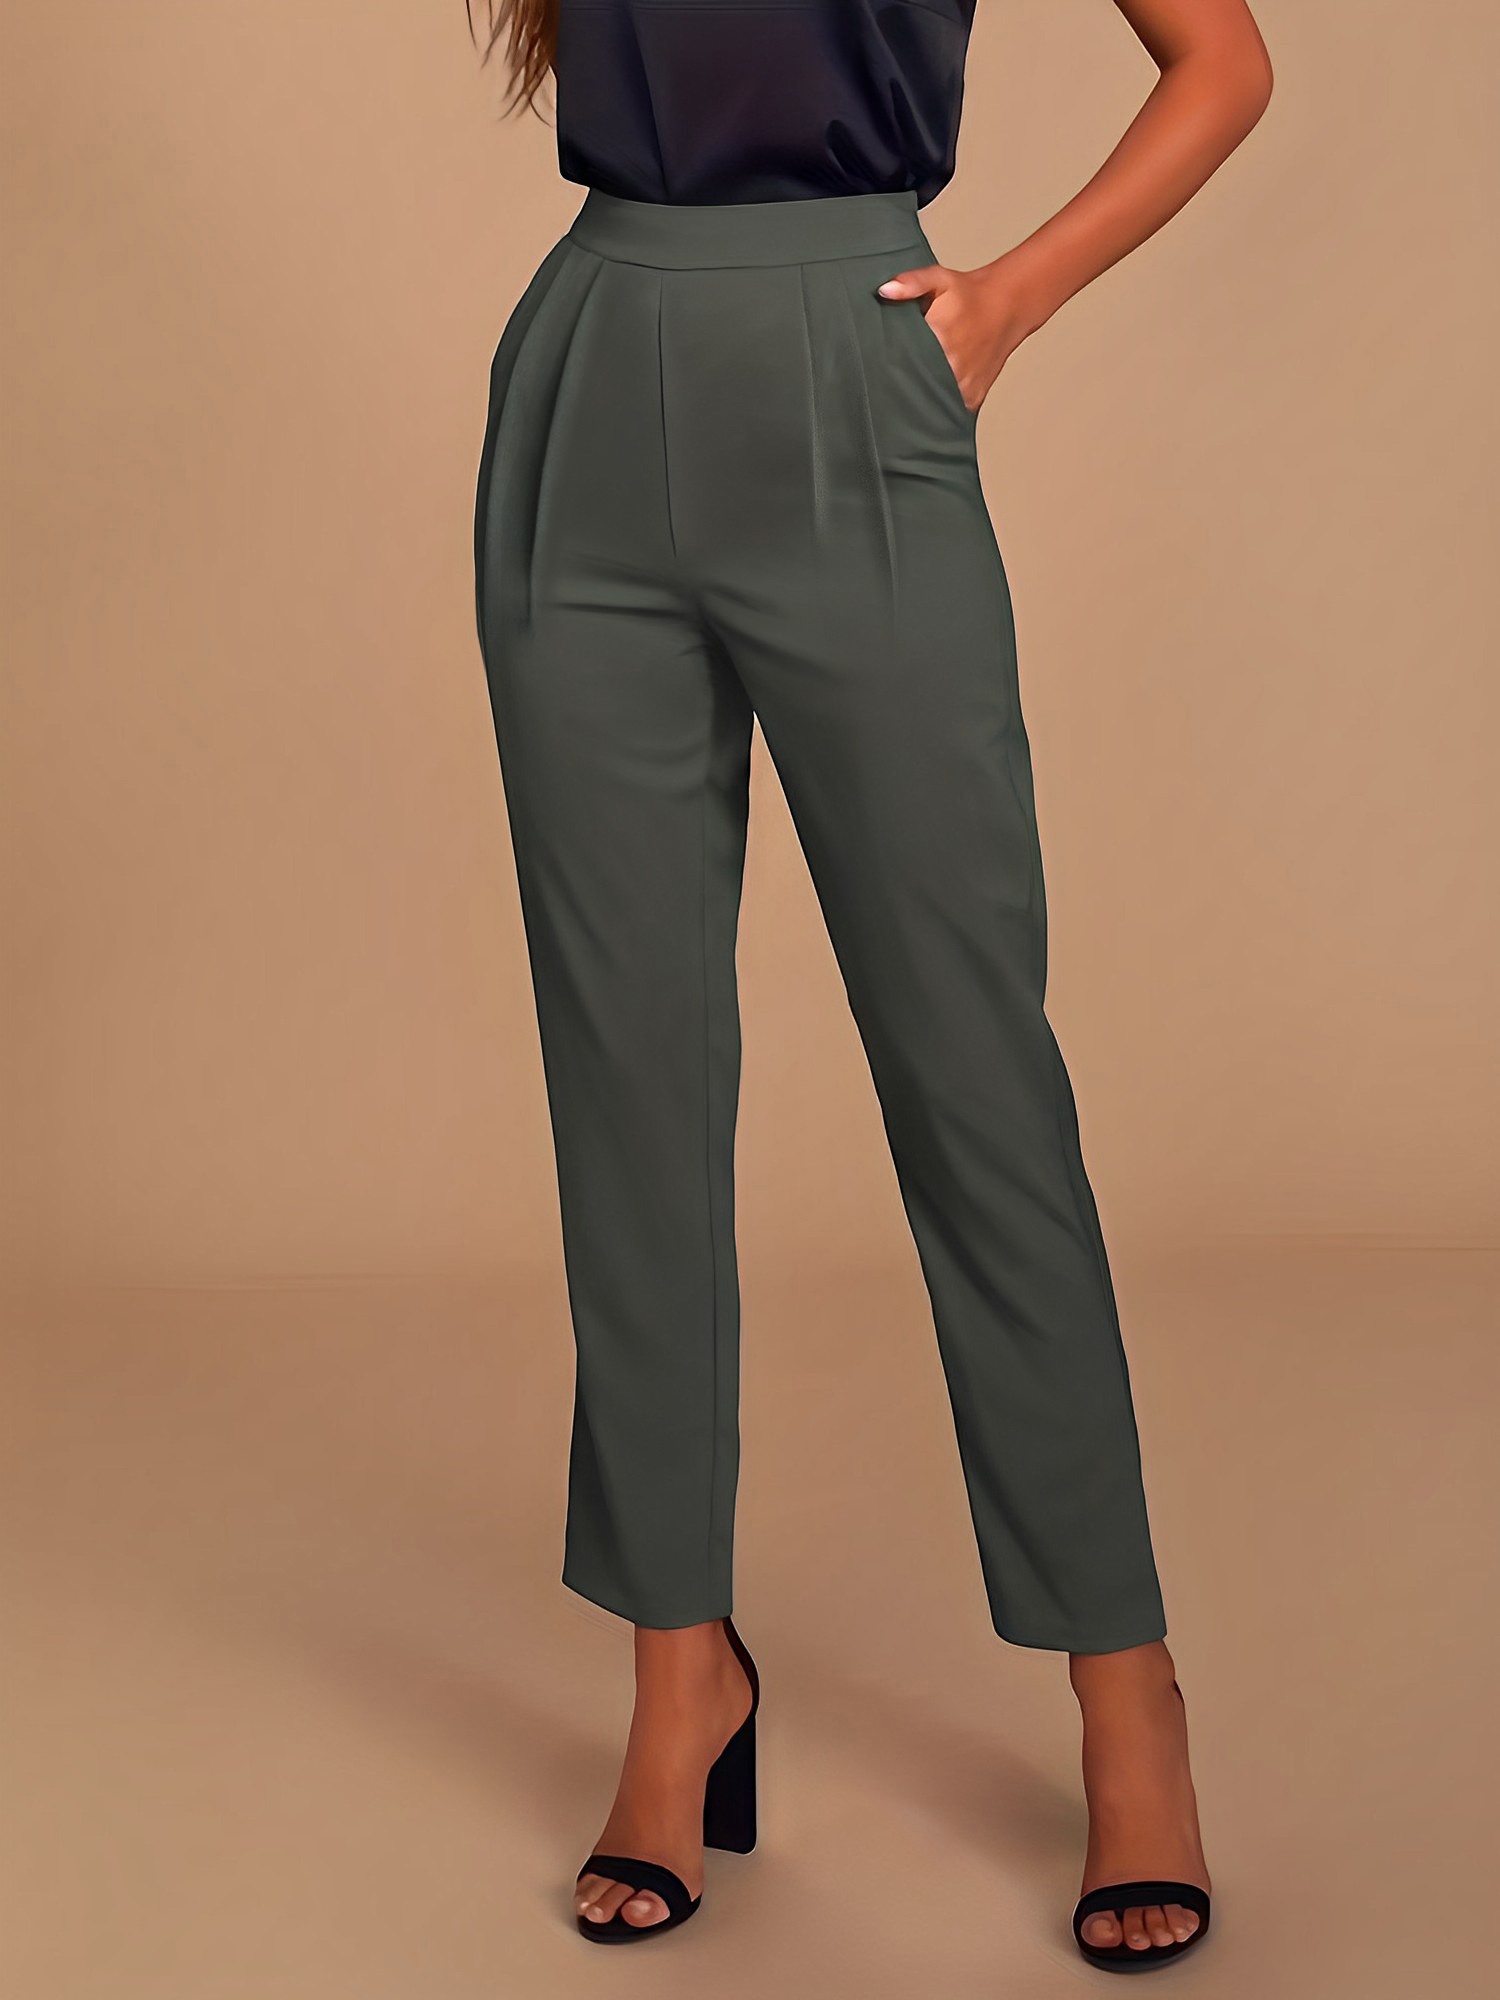 Slant Pockets Tapered Pants, Business Casual Pants For Office